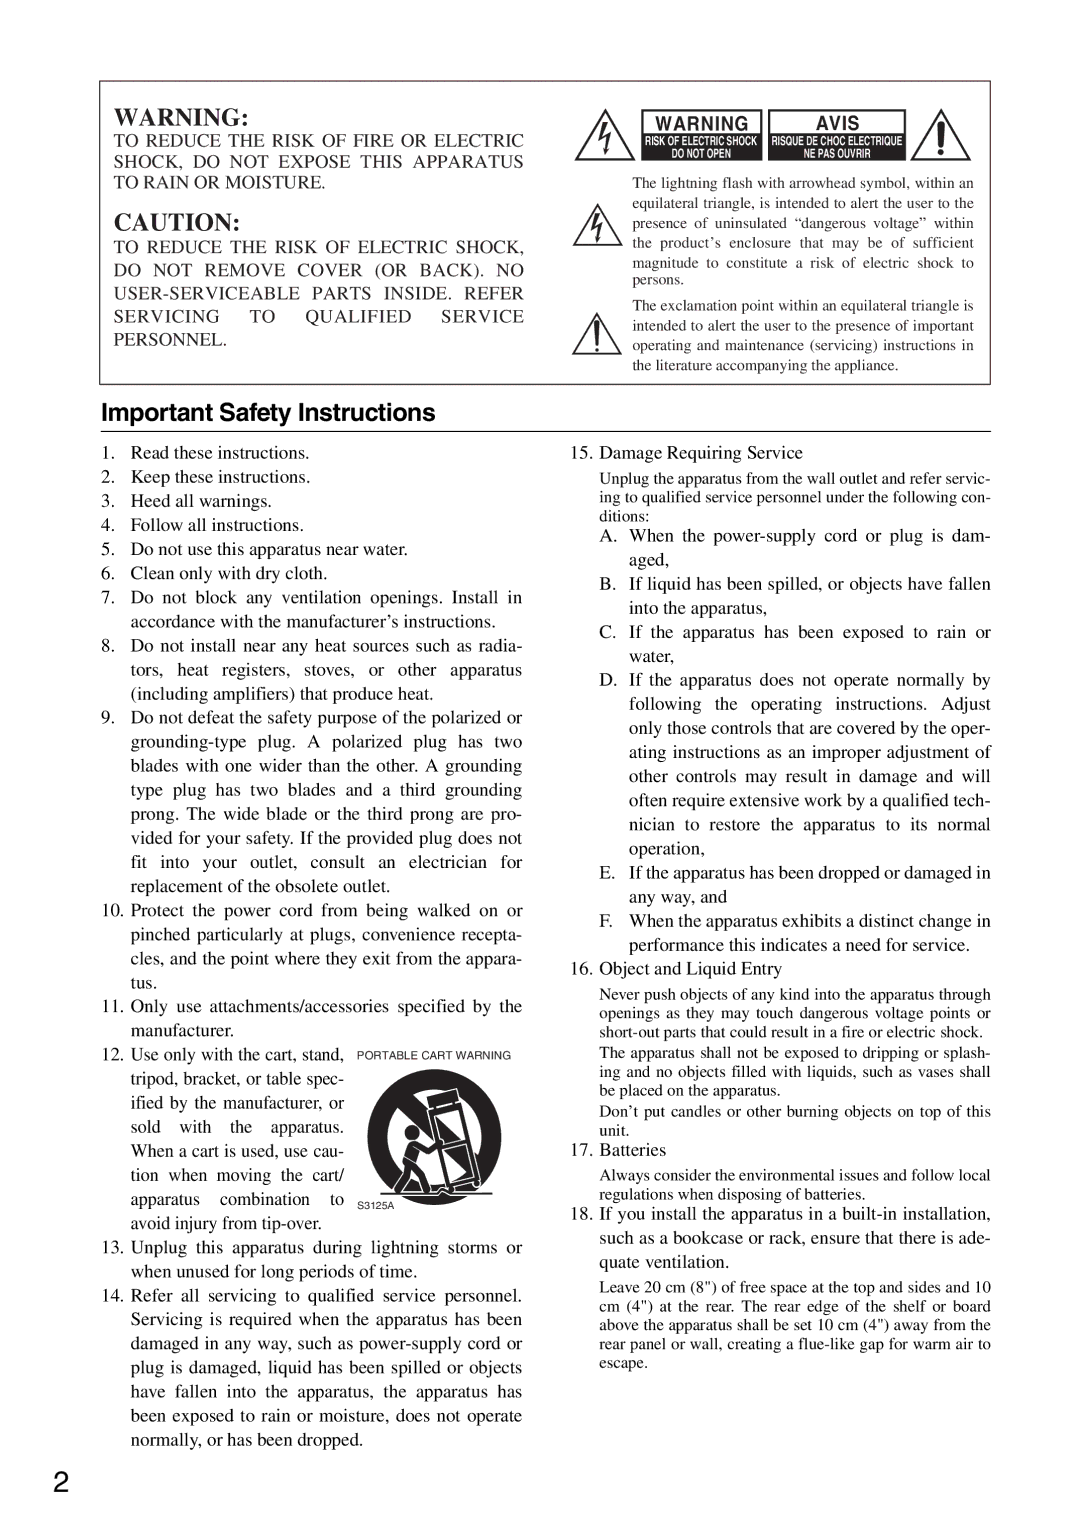 Integra DSR-4.8 instruction manual Important Safety Instructions, Batteries 